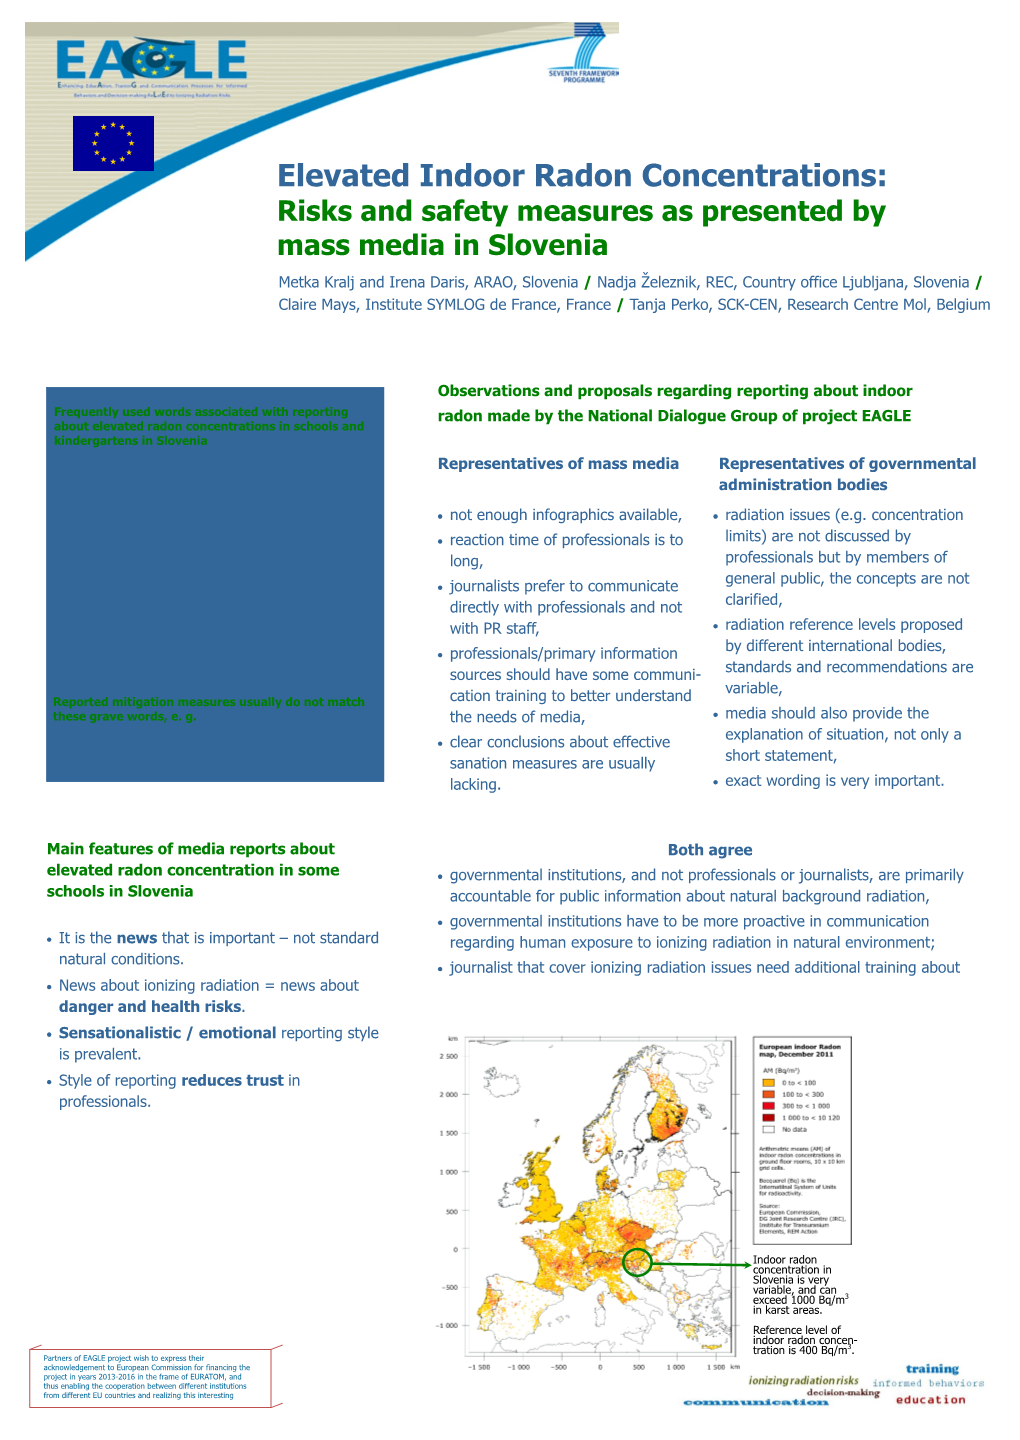 Risks and Safety Measures As Presented by Mass Media in Slovenia